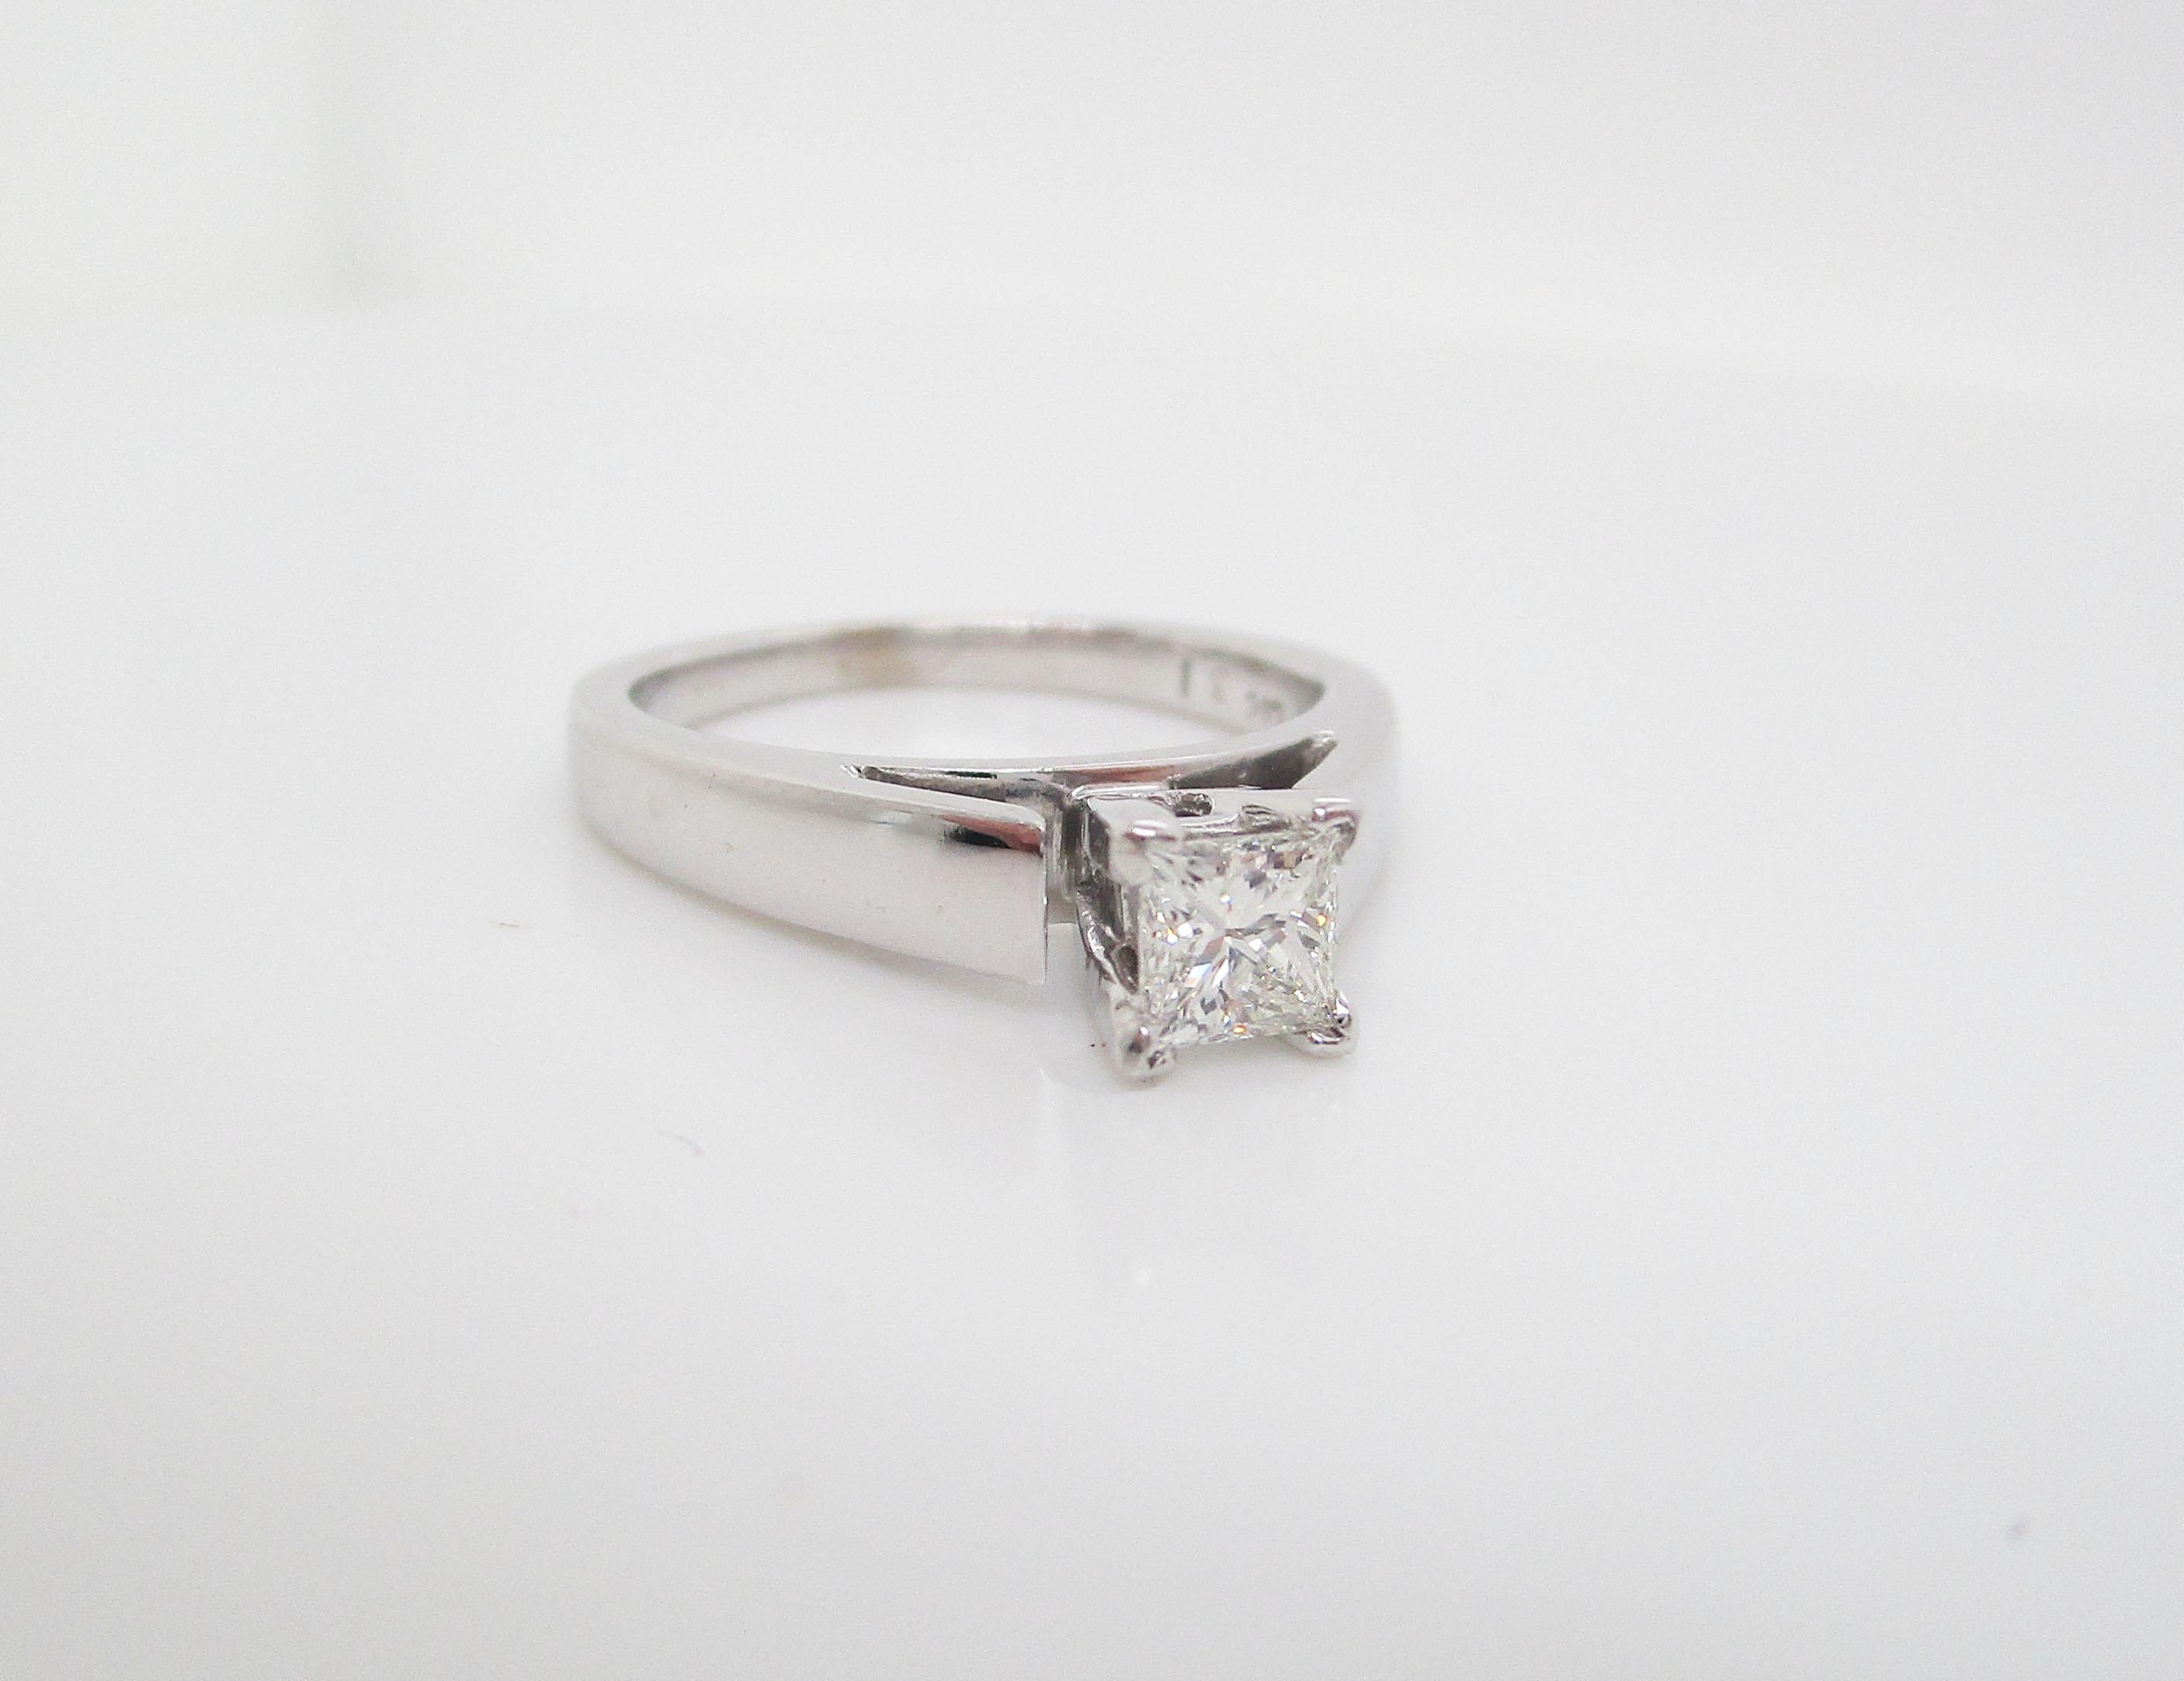 This is a gorgeous engagement ring in 14k white gold with a solitaire style princess cut diamond center! This is the epitome of a modern traditional engagement ring. The classic, sleek look holds the beautiful diamond front and center between four